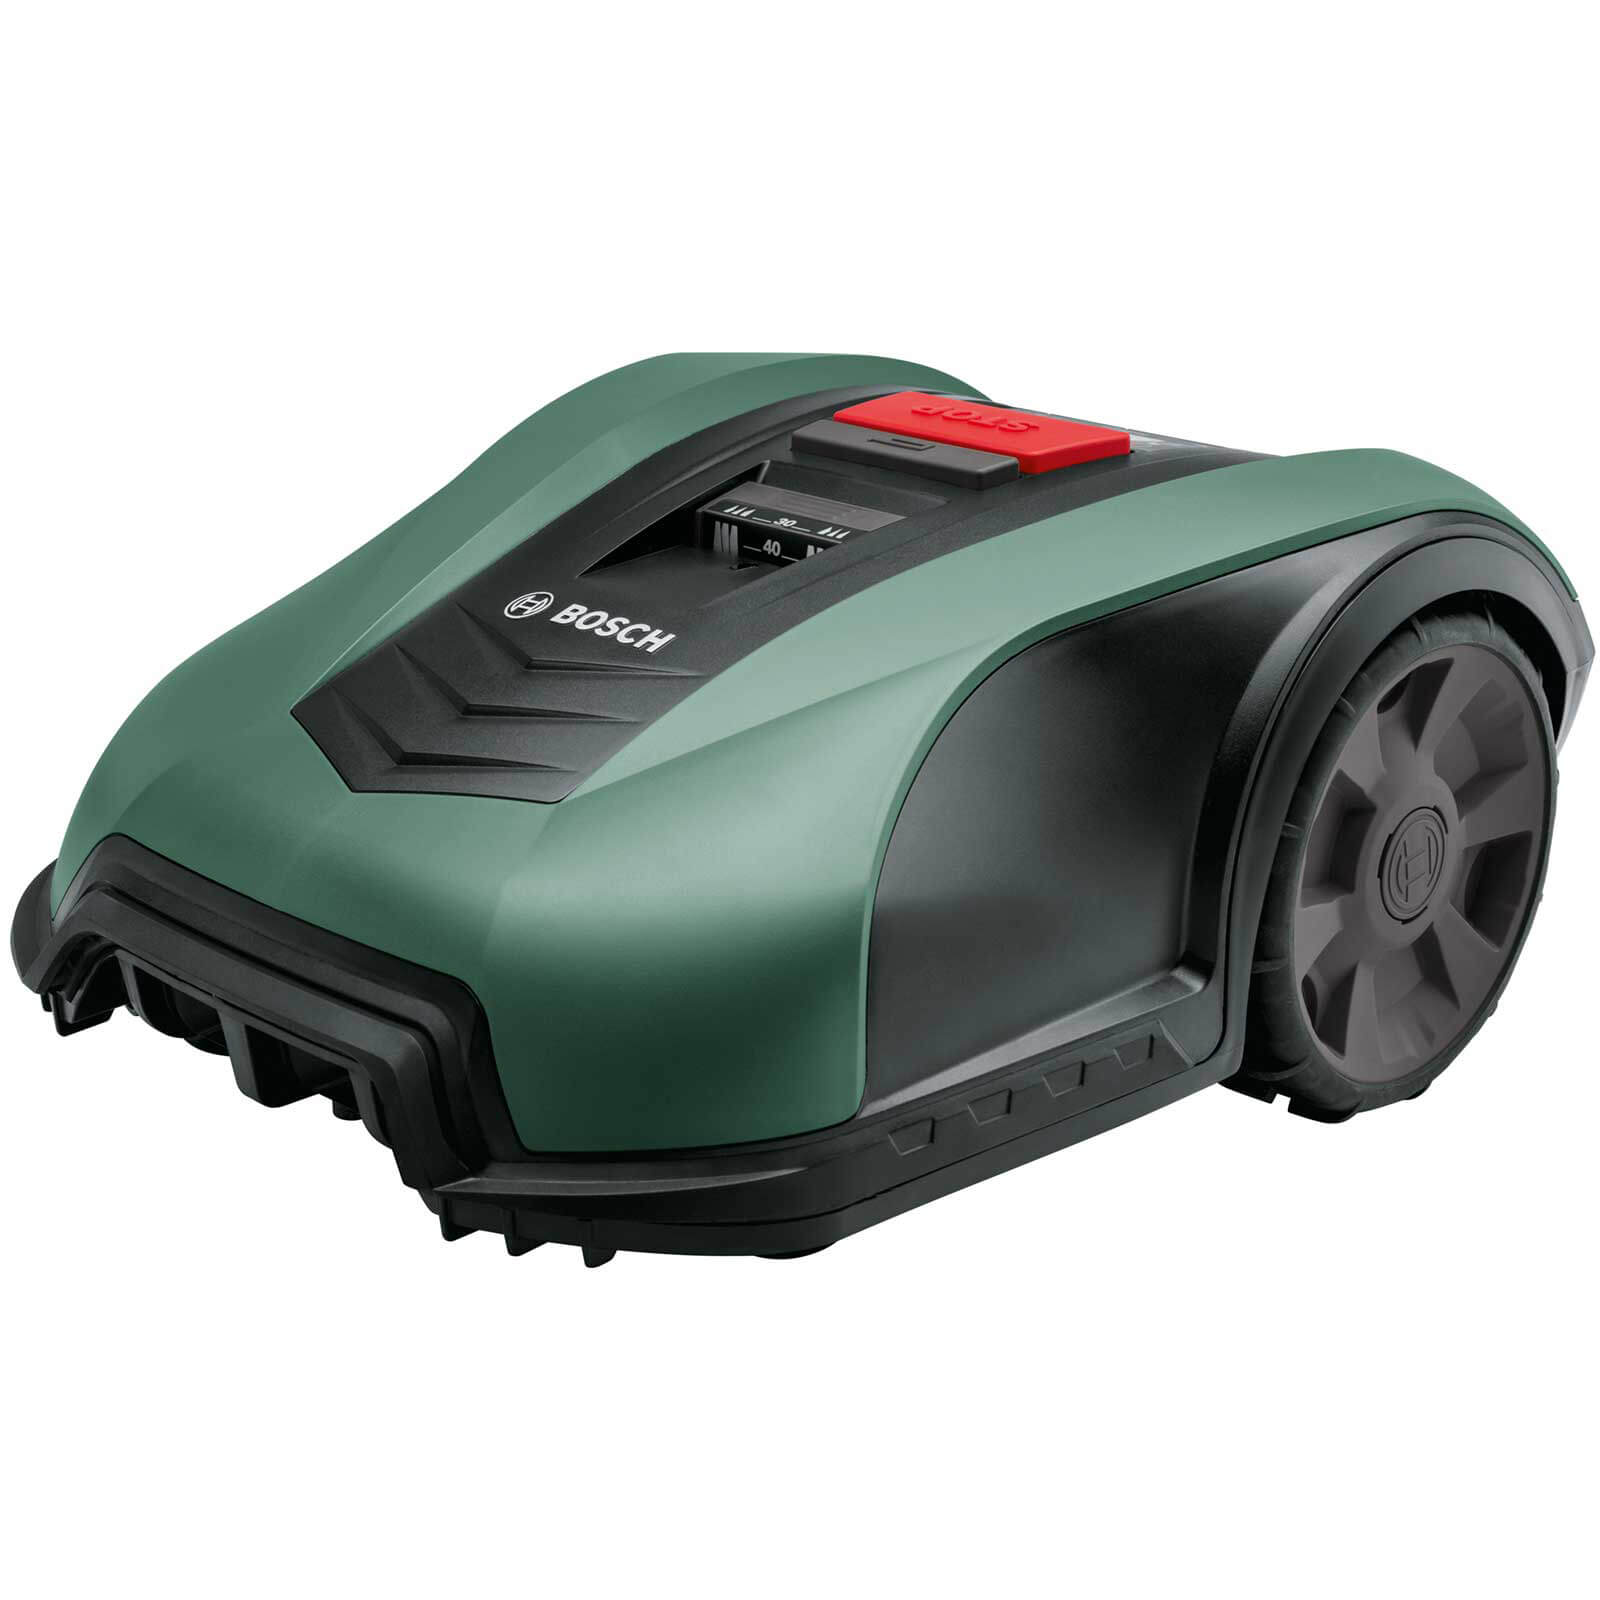 Image of Bosch INDEGO M+ 700 18v Cordless Smart Robotic Lawnmower 700m2 190mm 1 x 2.5ah Integrated Li-ion Charger